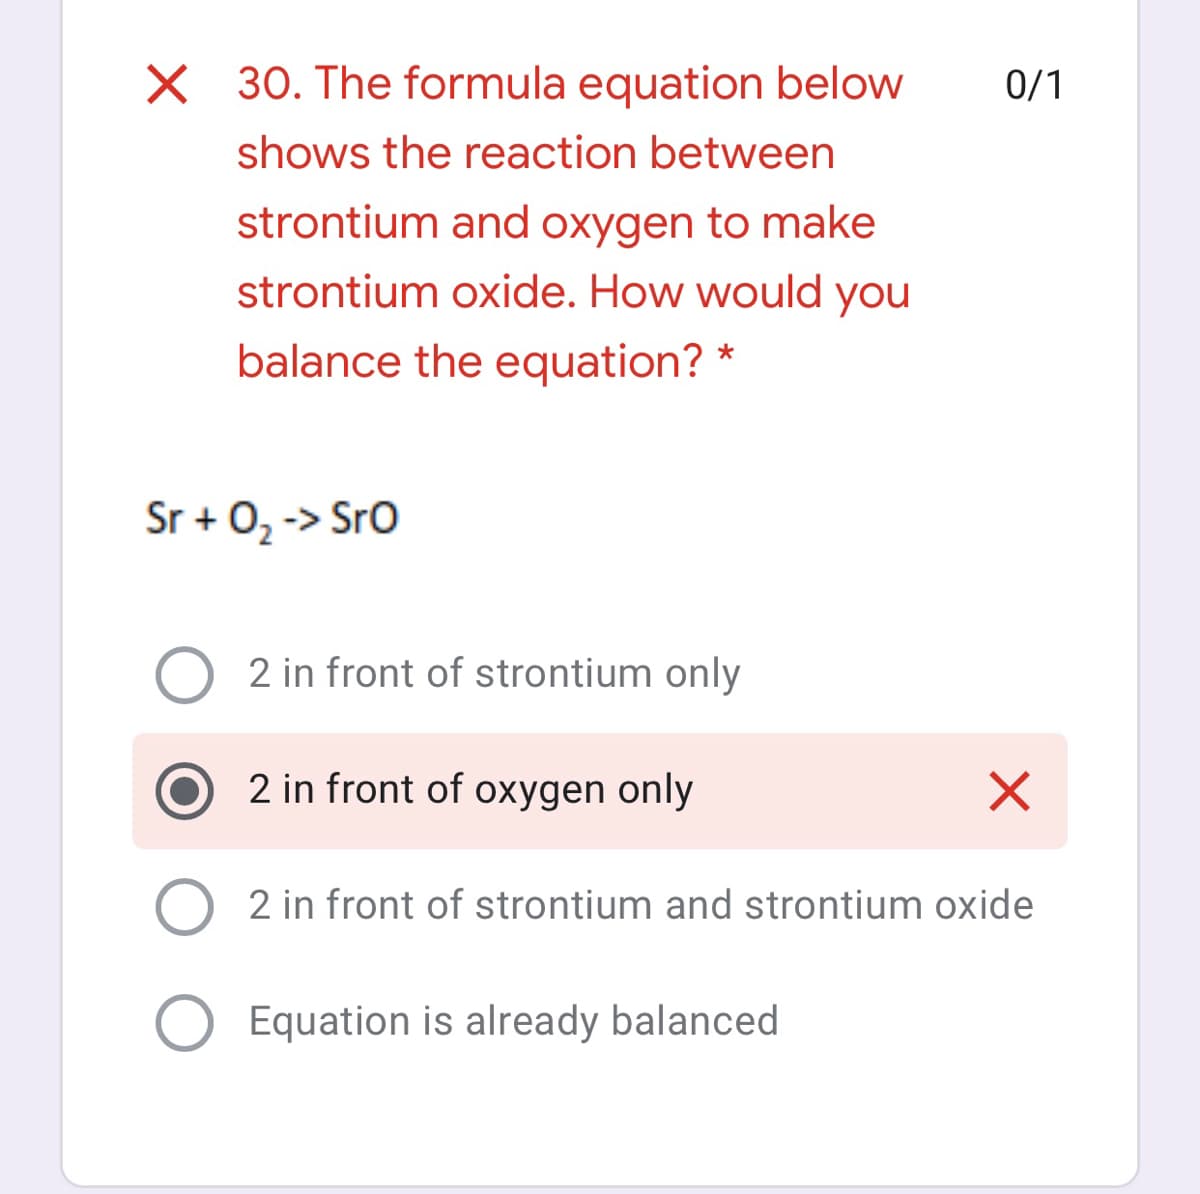 X 30. The formula equation below
0/1
shows the reaction between
strontium and oxygen to make
strontium oxide. How would you
balance the equation? *
Sr + 02 -> Sro
2 in front of strontium only
2 in front of oxygen only
2 in front of strontium and strontium oxide
Equation is already balanced
